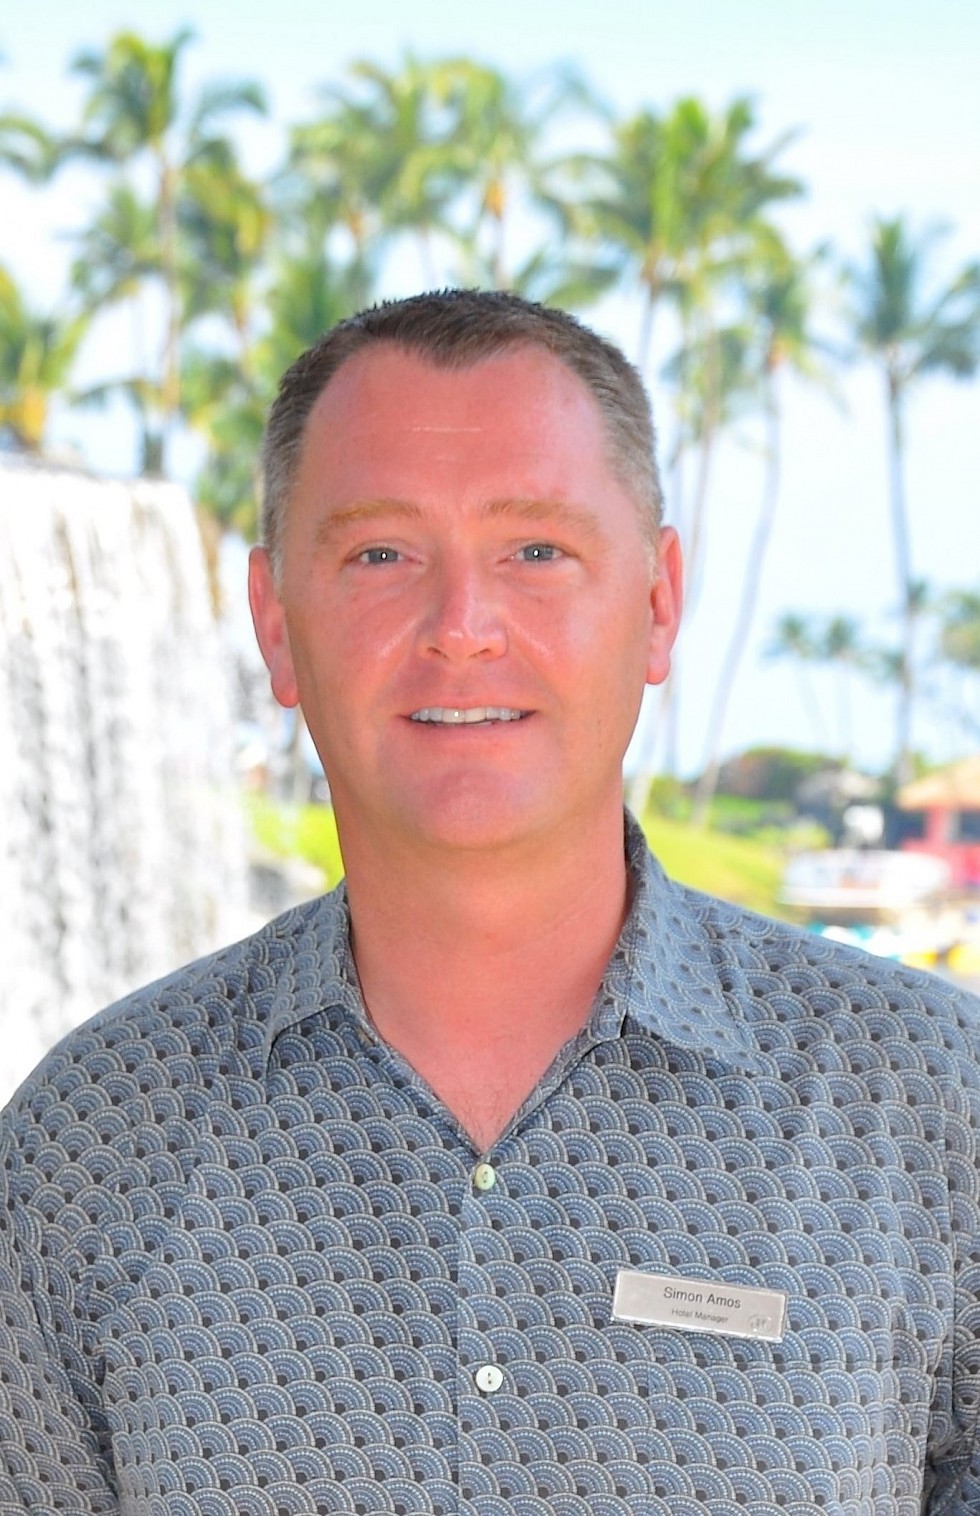 Simon is loving life in Hawaii as Hilton Hotel manager